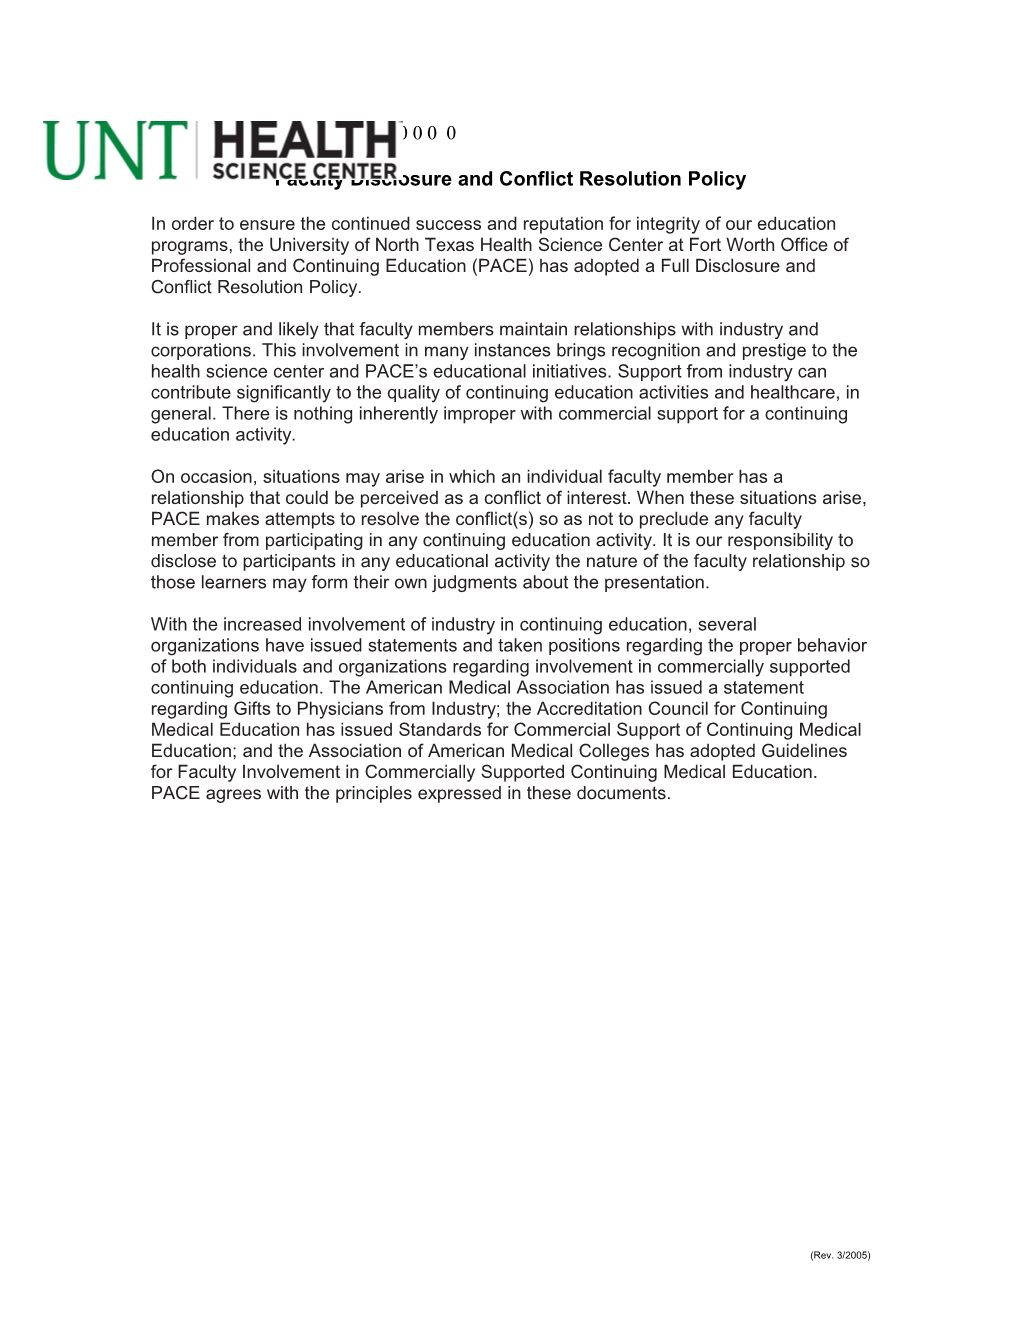 Faculty Disclosure and Conflict Resolution Policy